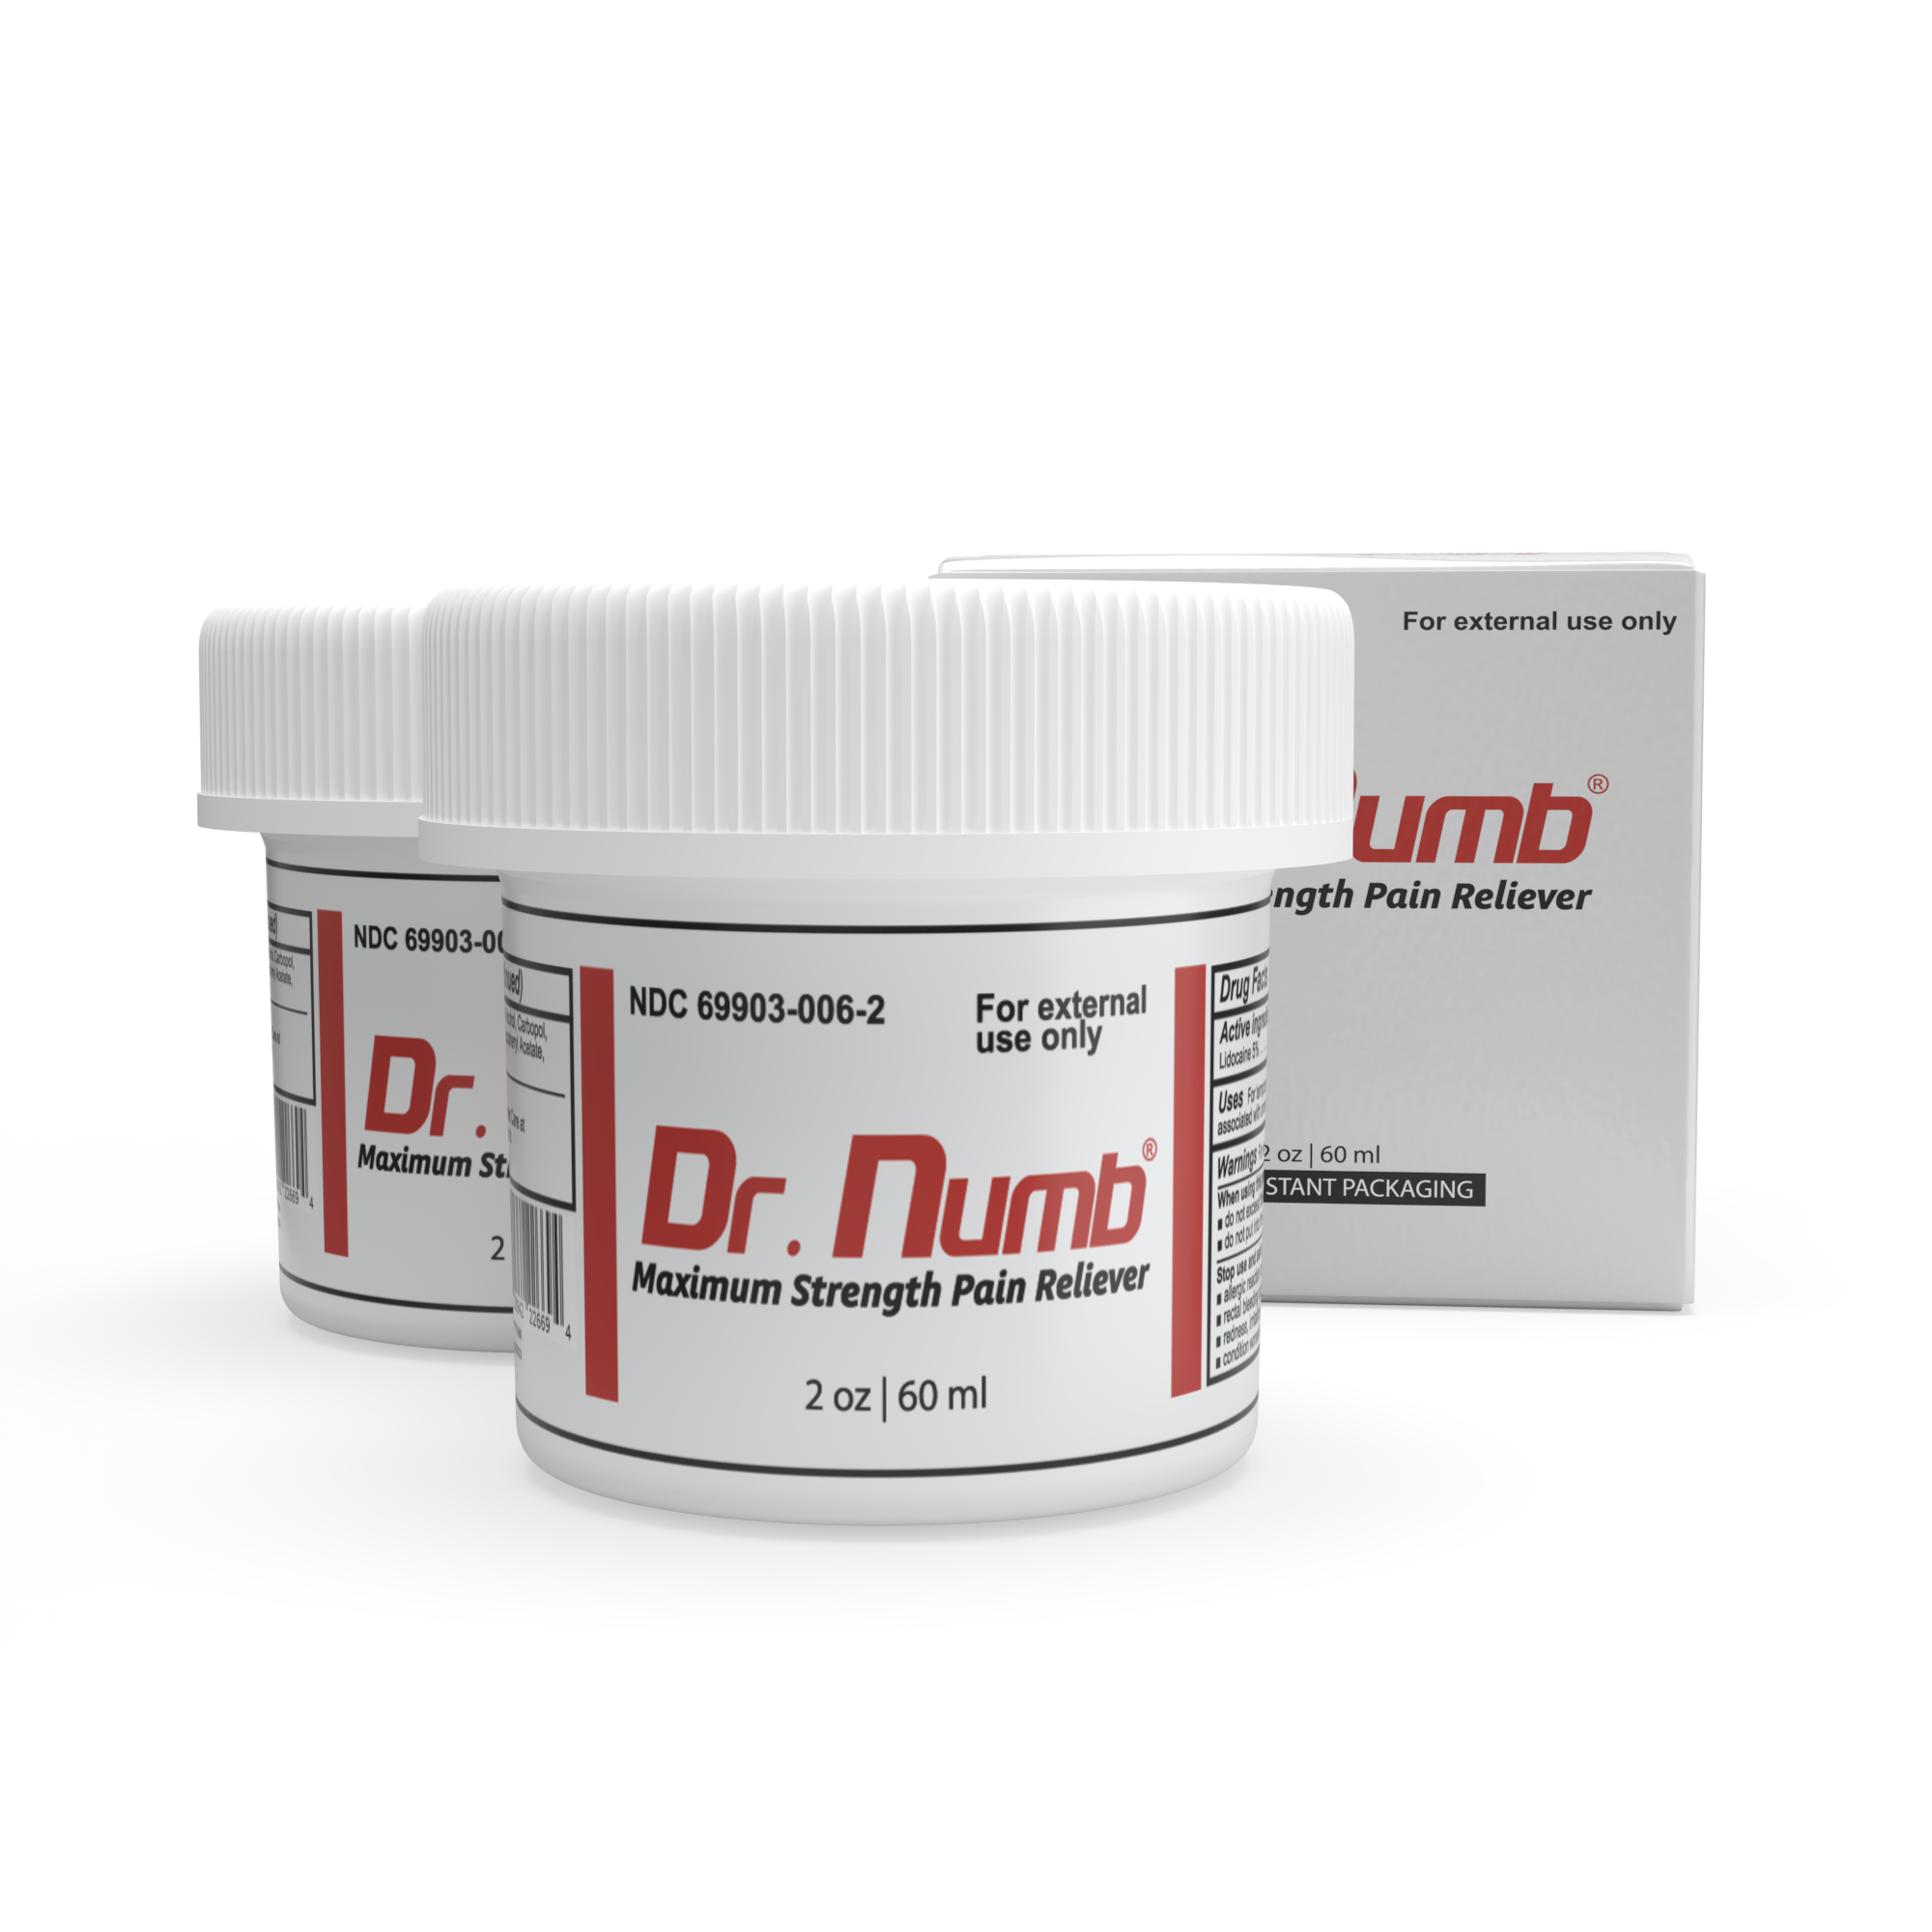 Dr Numb Topical Anesthetic Numbing Cream - Buy for Painless Tattoos